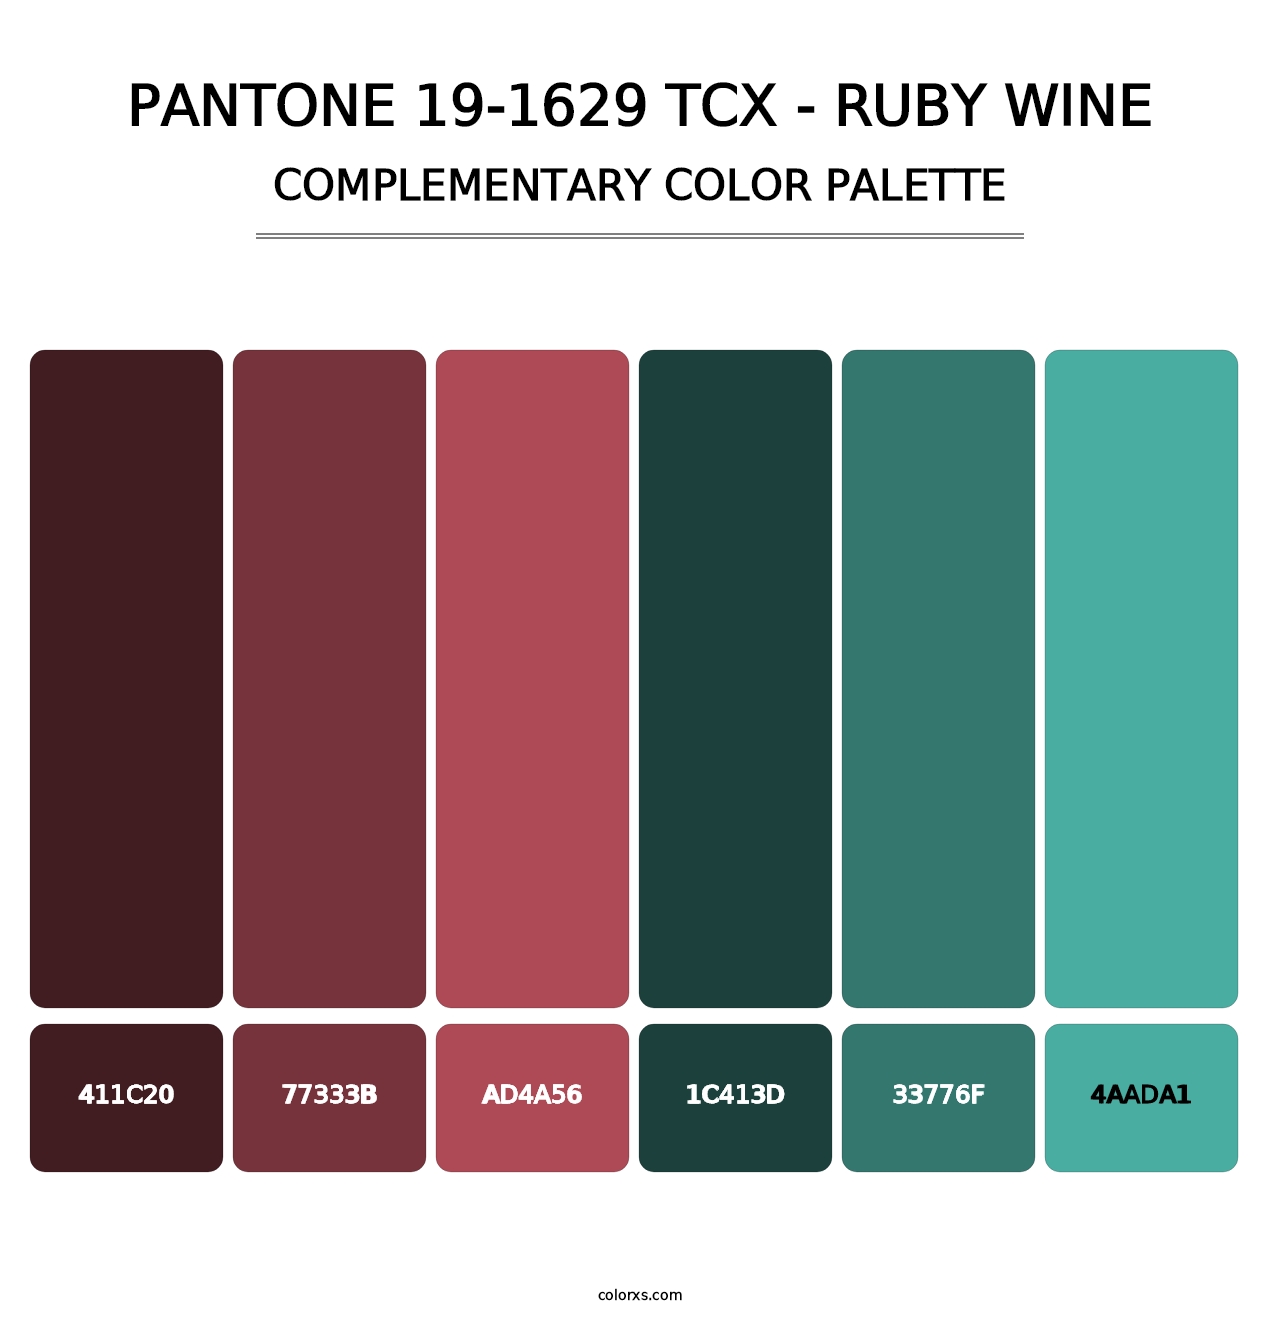 PANTONE 19-1629 TCX - Ruby Wine - Complementary Color Palette